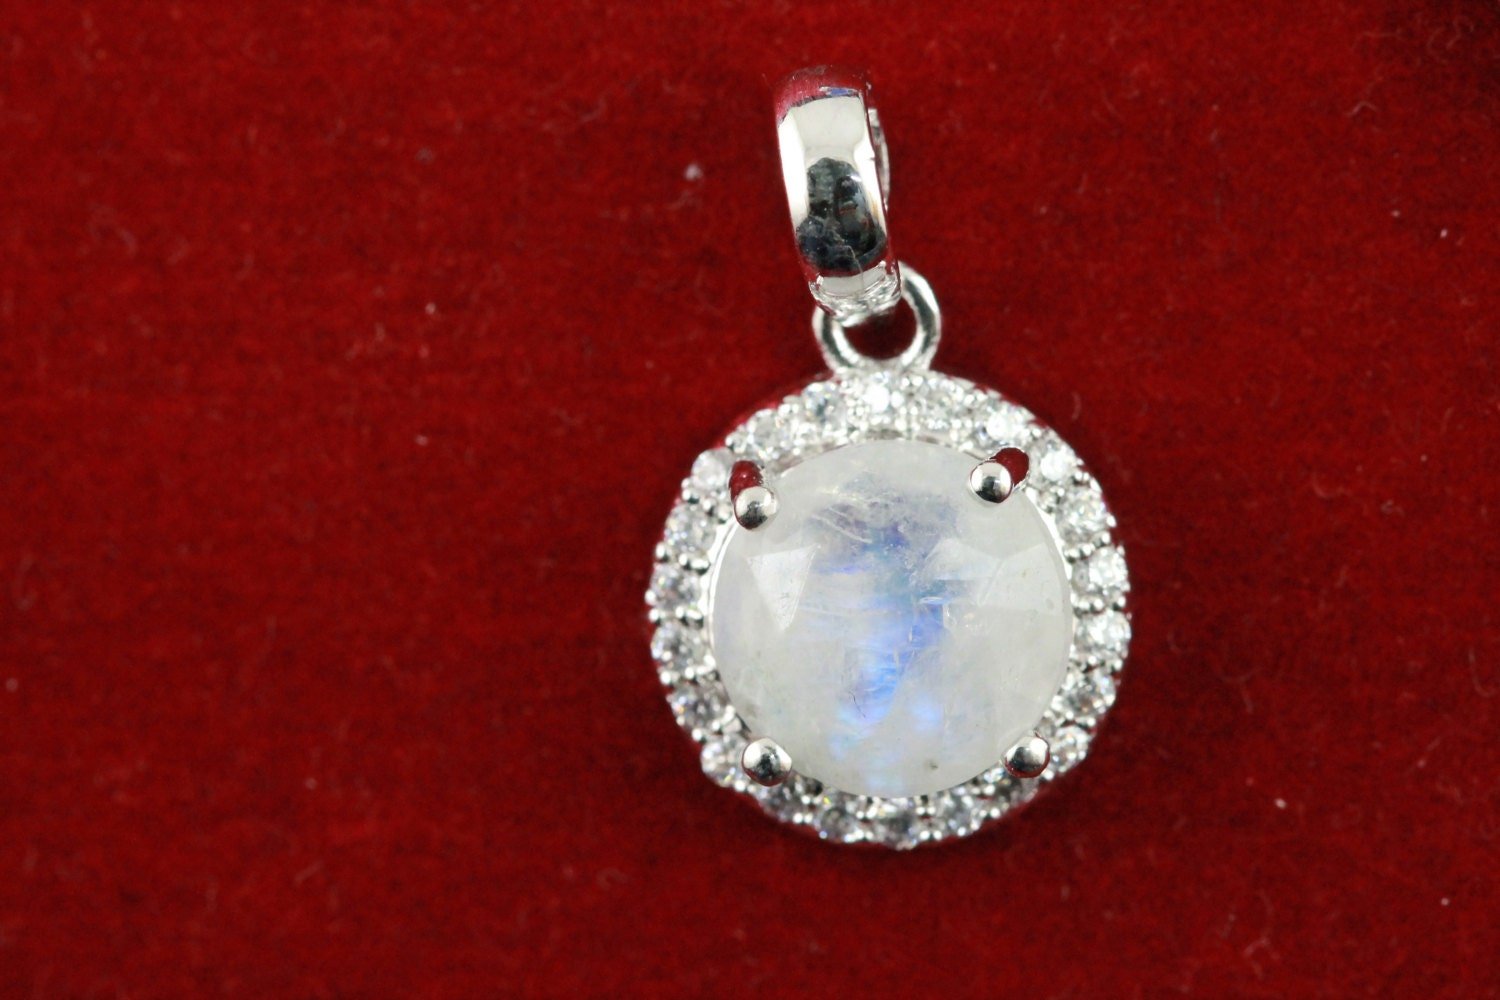 Pendants Natural Gemstone Silver Plated Brass Prong Setting and CZ - Meena Design